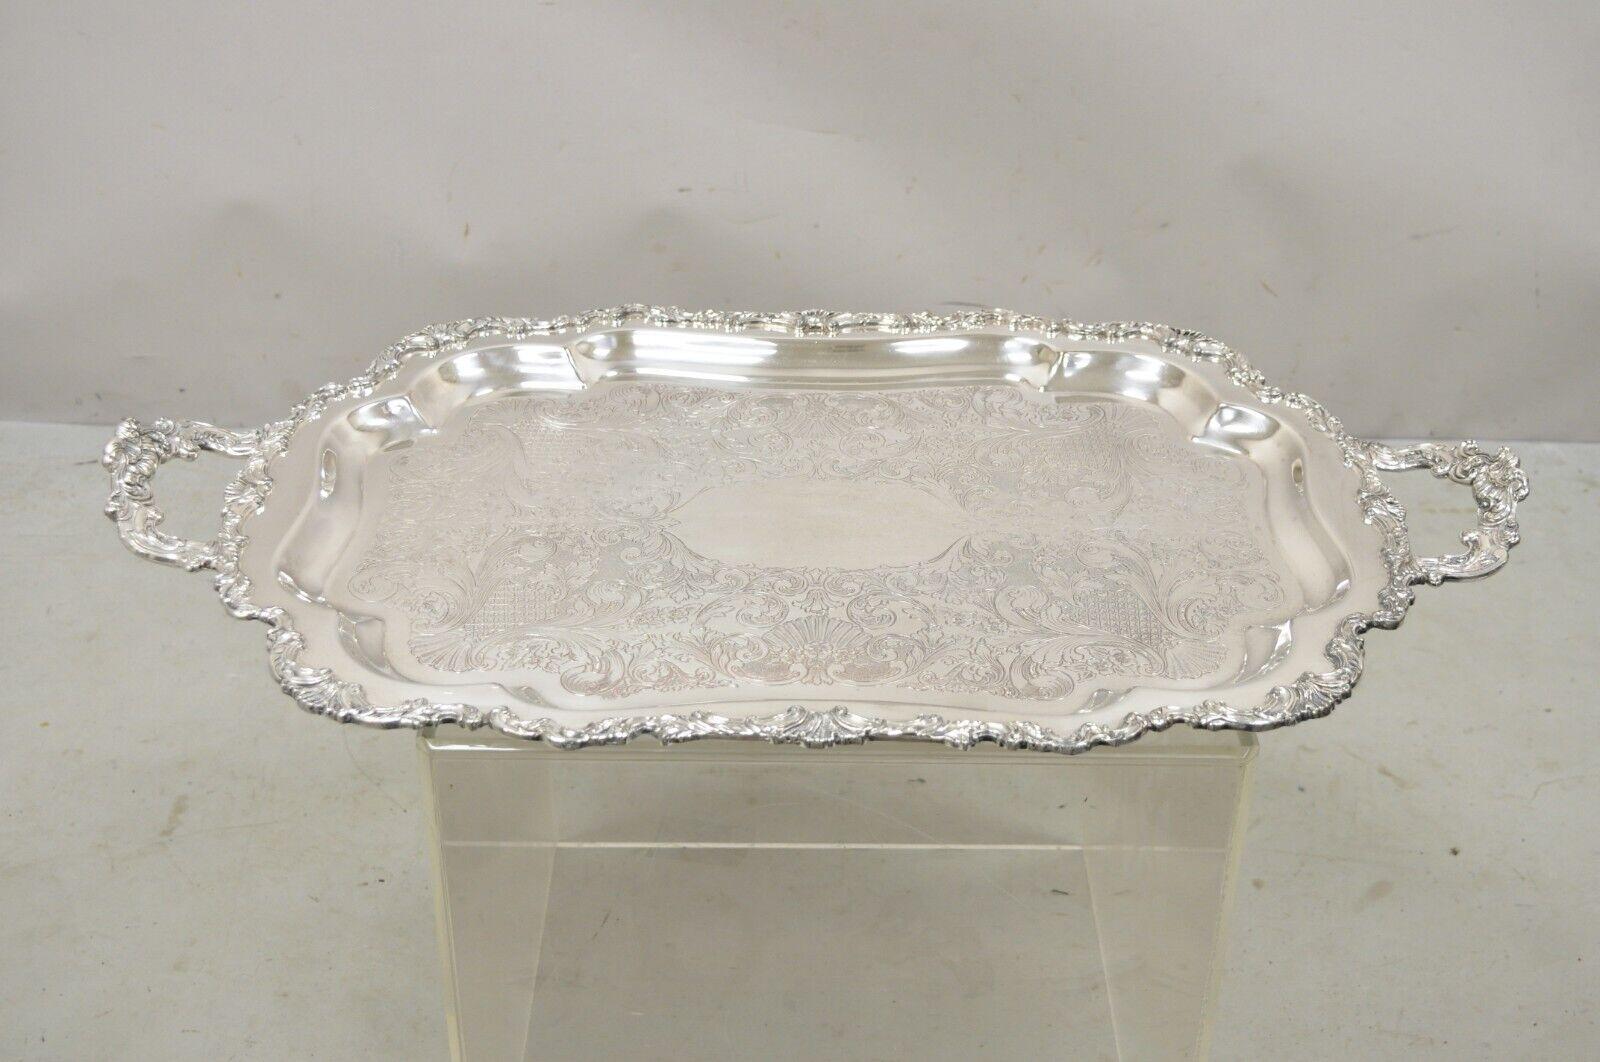 Vintage Community Ascot 0316-10 Silver Plated Ornate Twin Handle Serving Platter Tray. Item features large impressive size, ornate twin handles, shapely scalloped form. Circa Mid 20th Century. Measurements: 2